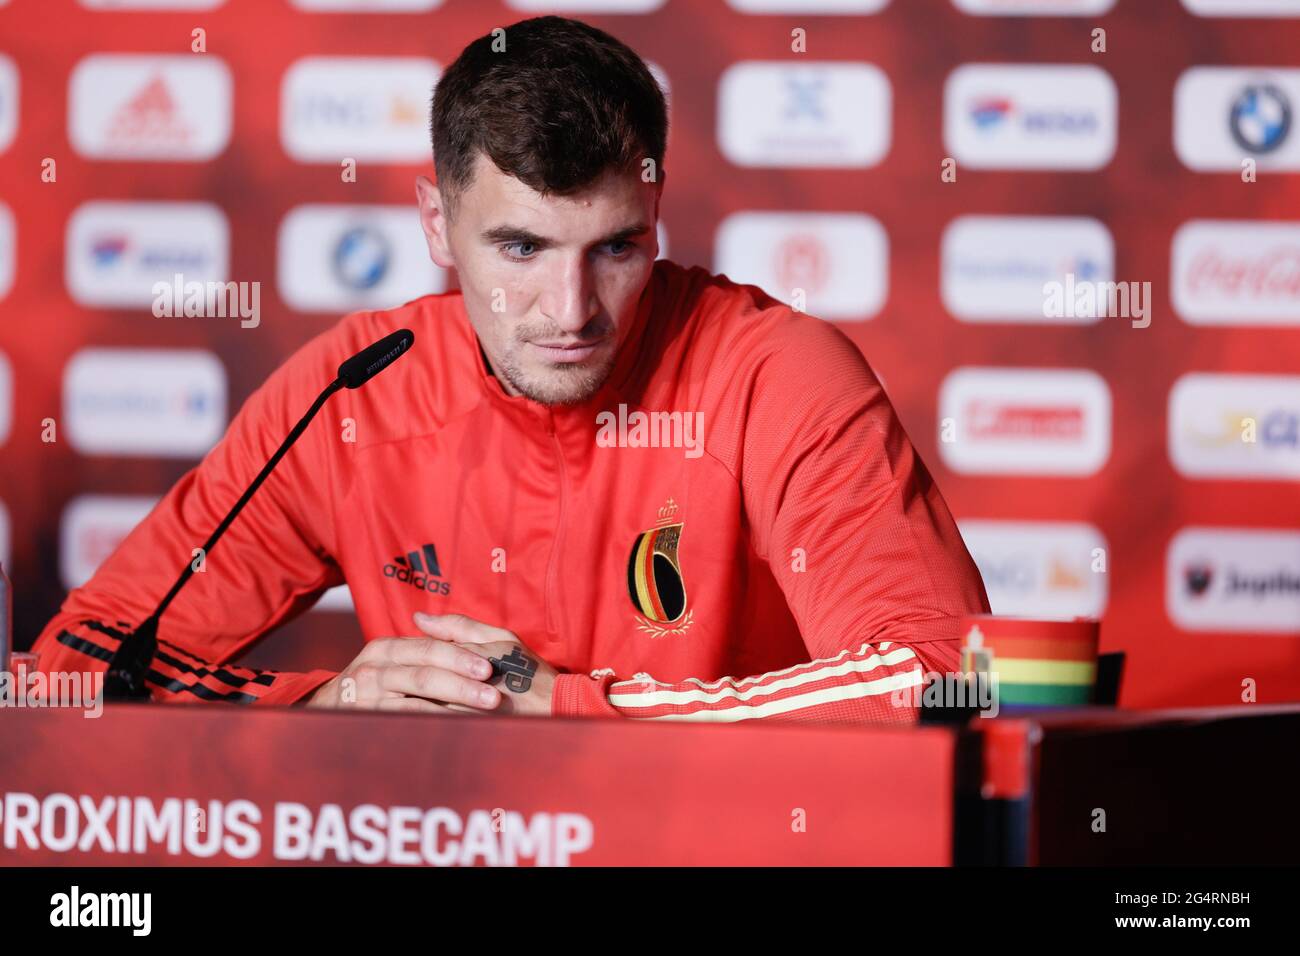 Belgium's Thomas Meunier pictured during a press meeting of the Belgian national soccer team Red Devils, in Tubize, Wednesday 23 June 2021. The team p Stock Photo